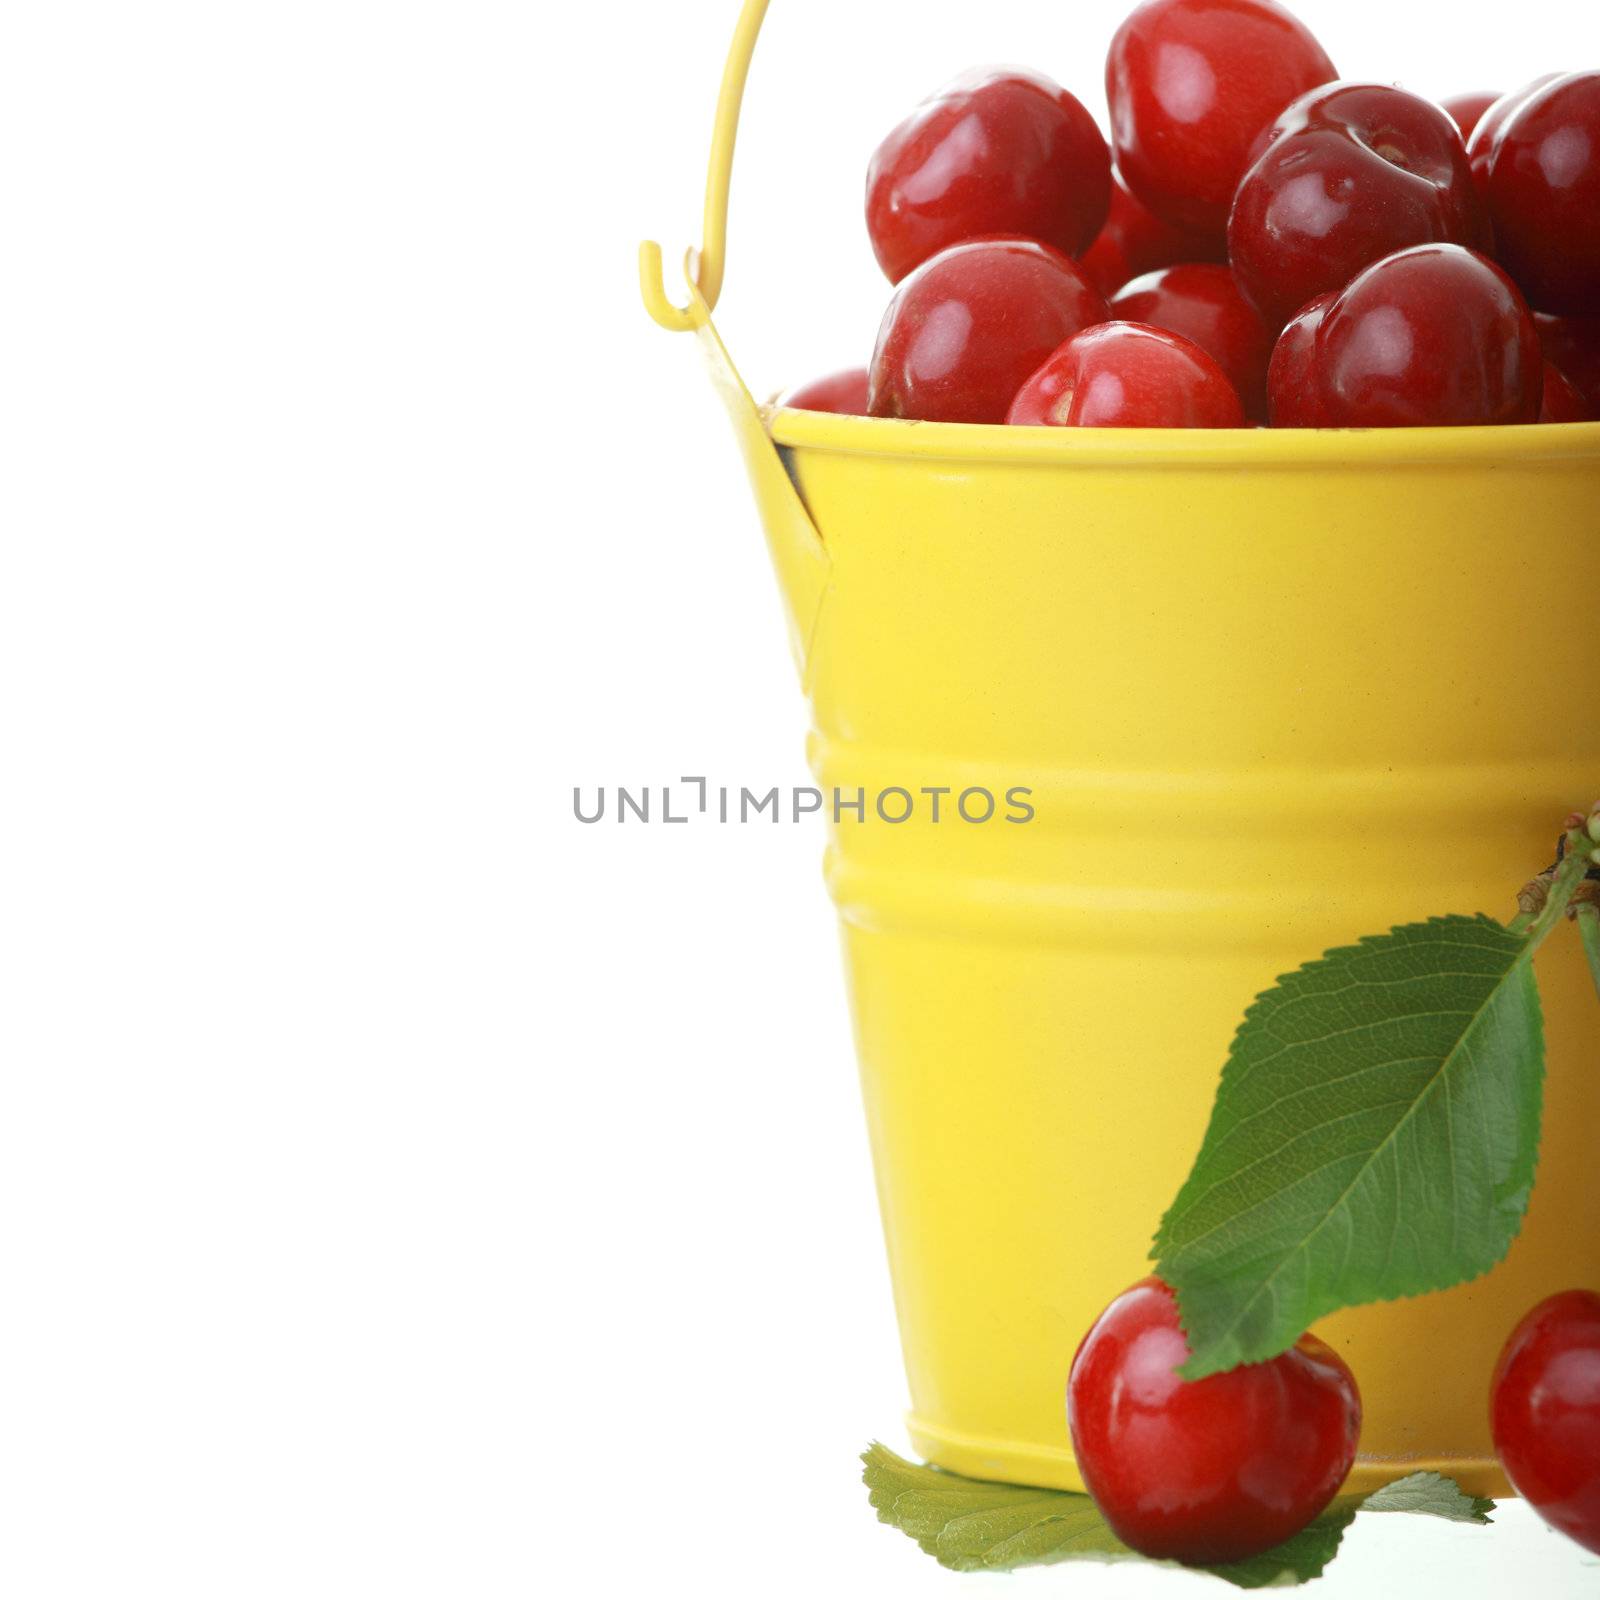 Cherries in colorful yellow metal bucket by BDS